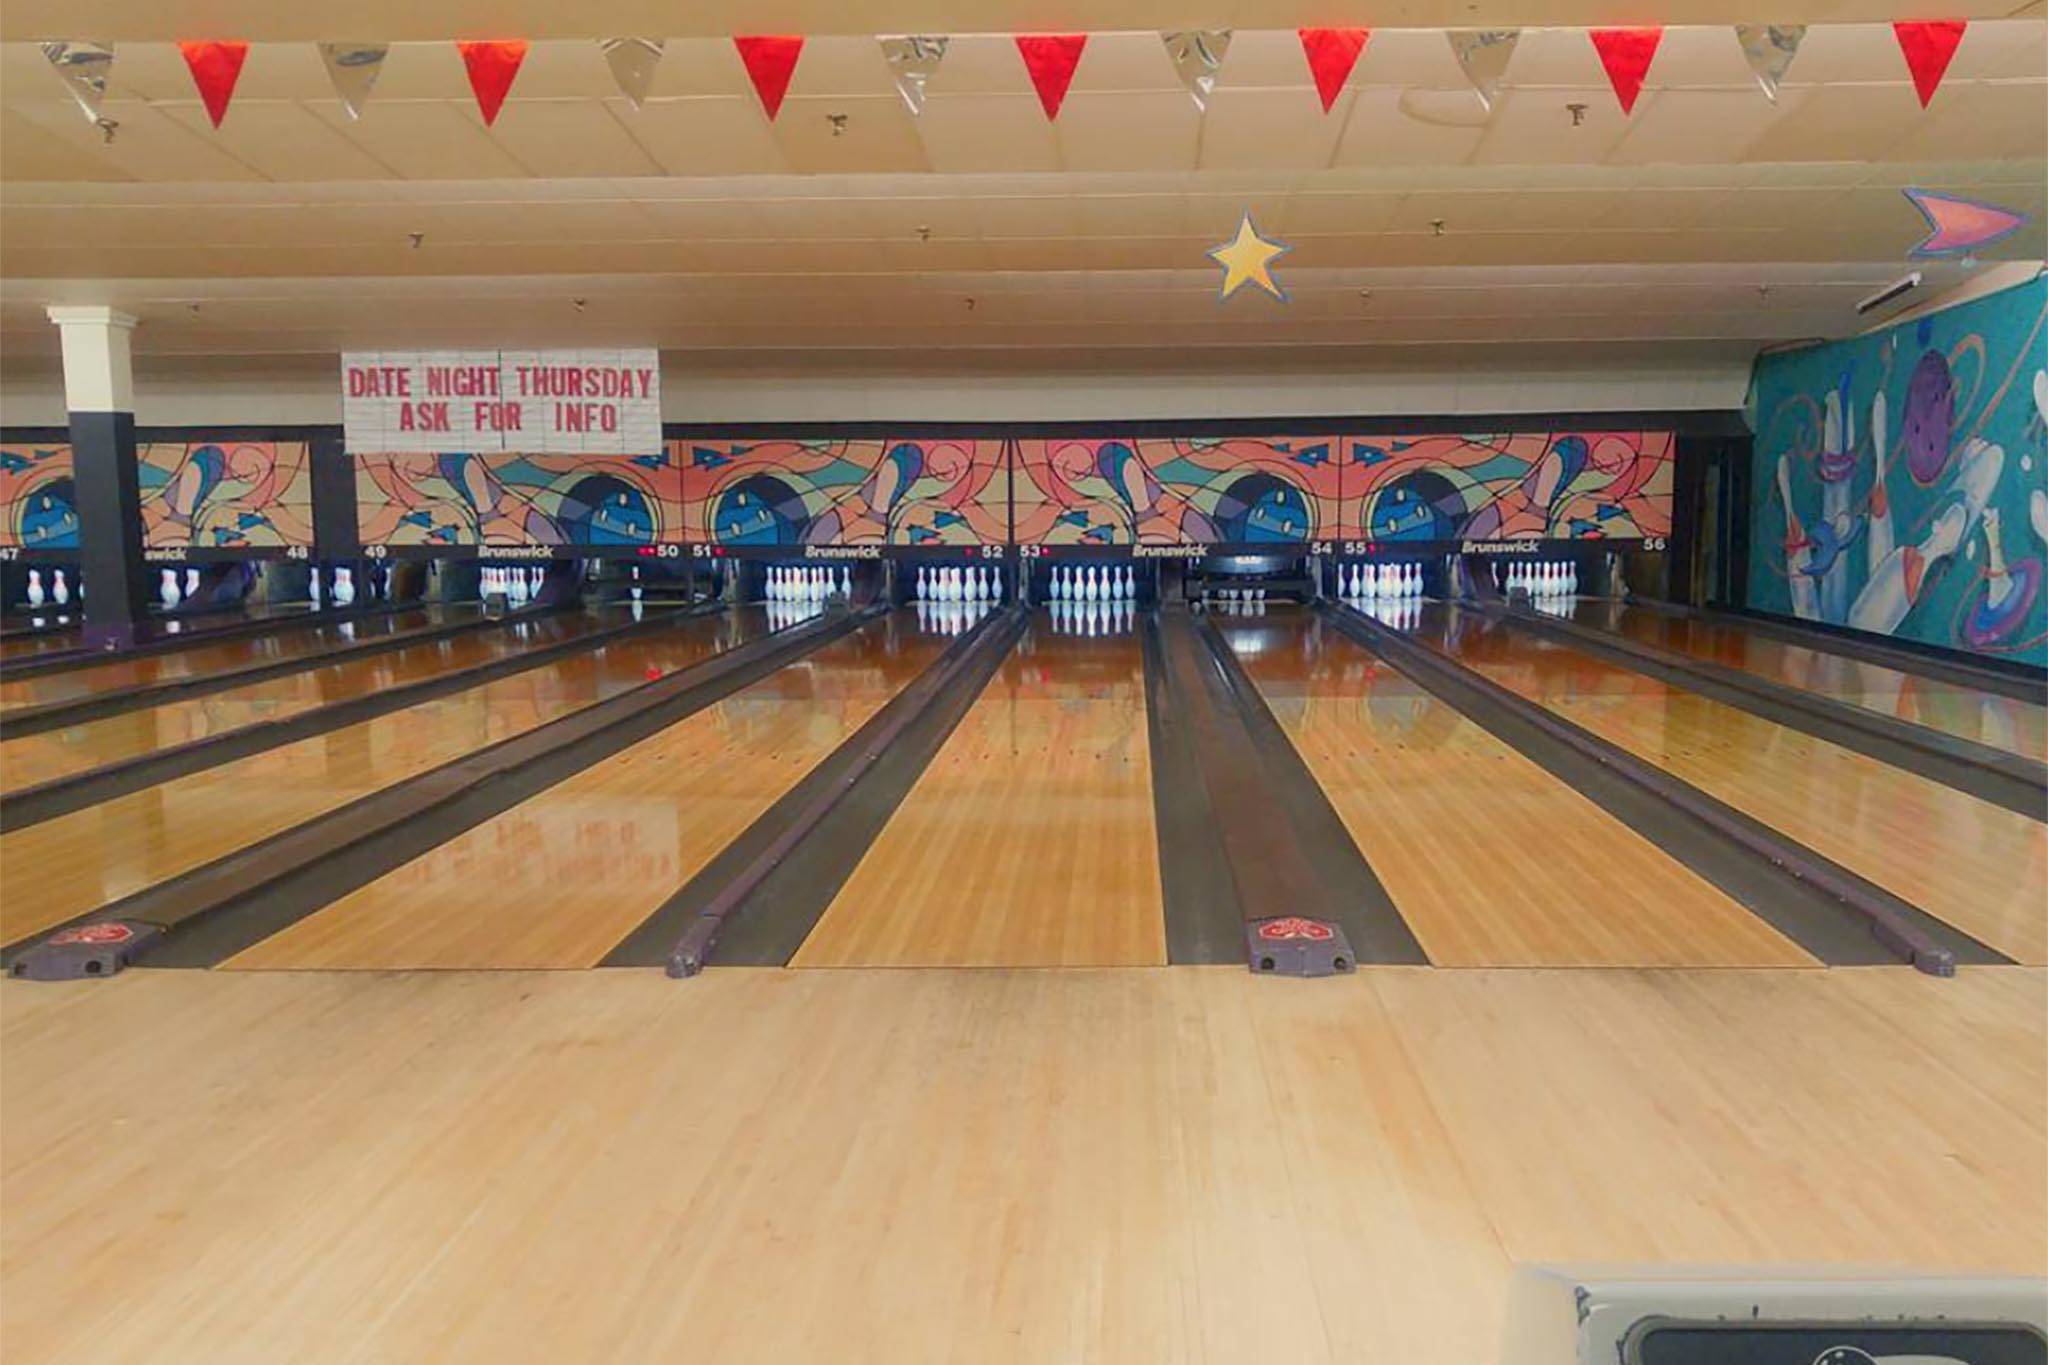 Toronto losing another bowling alley for condos